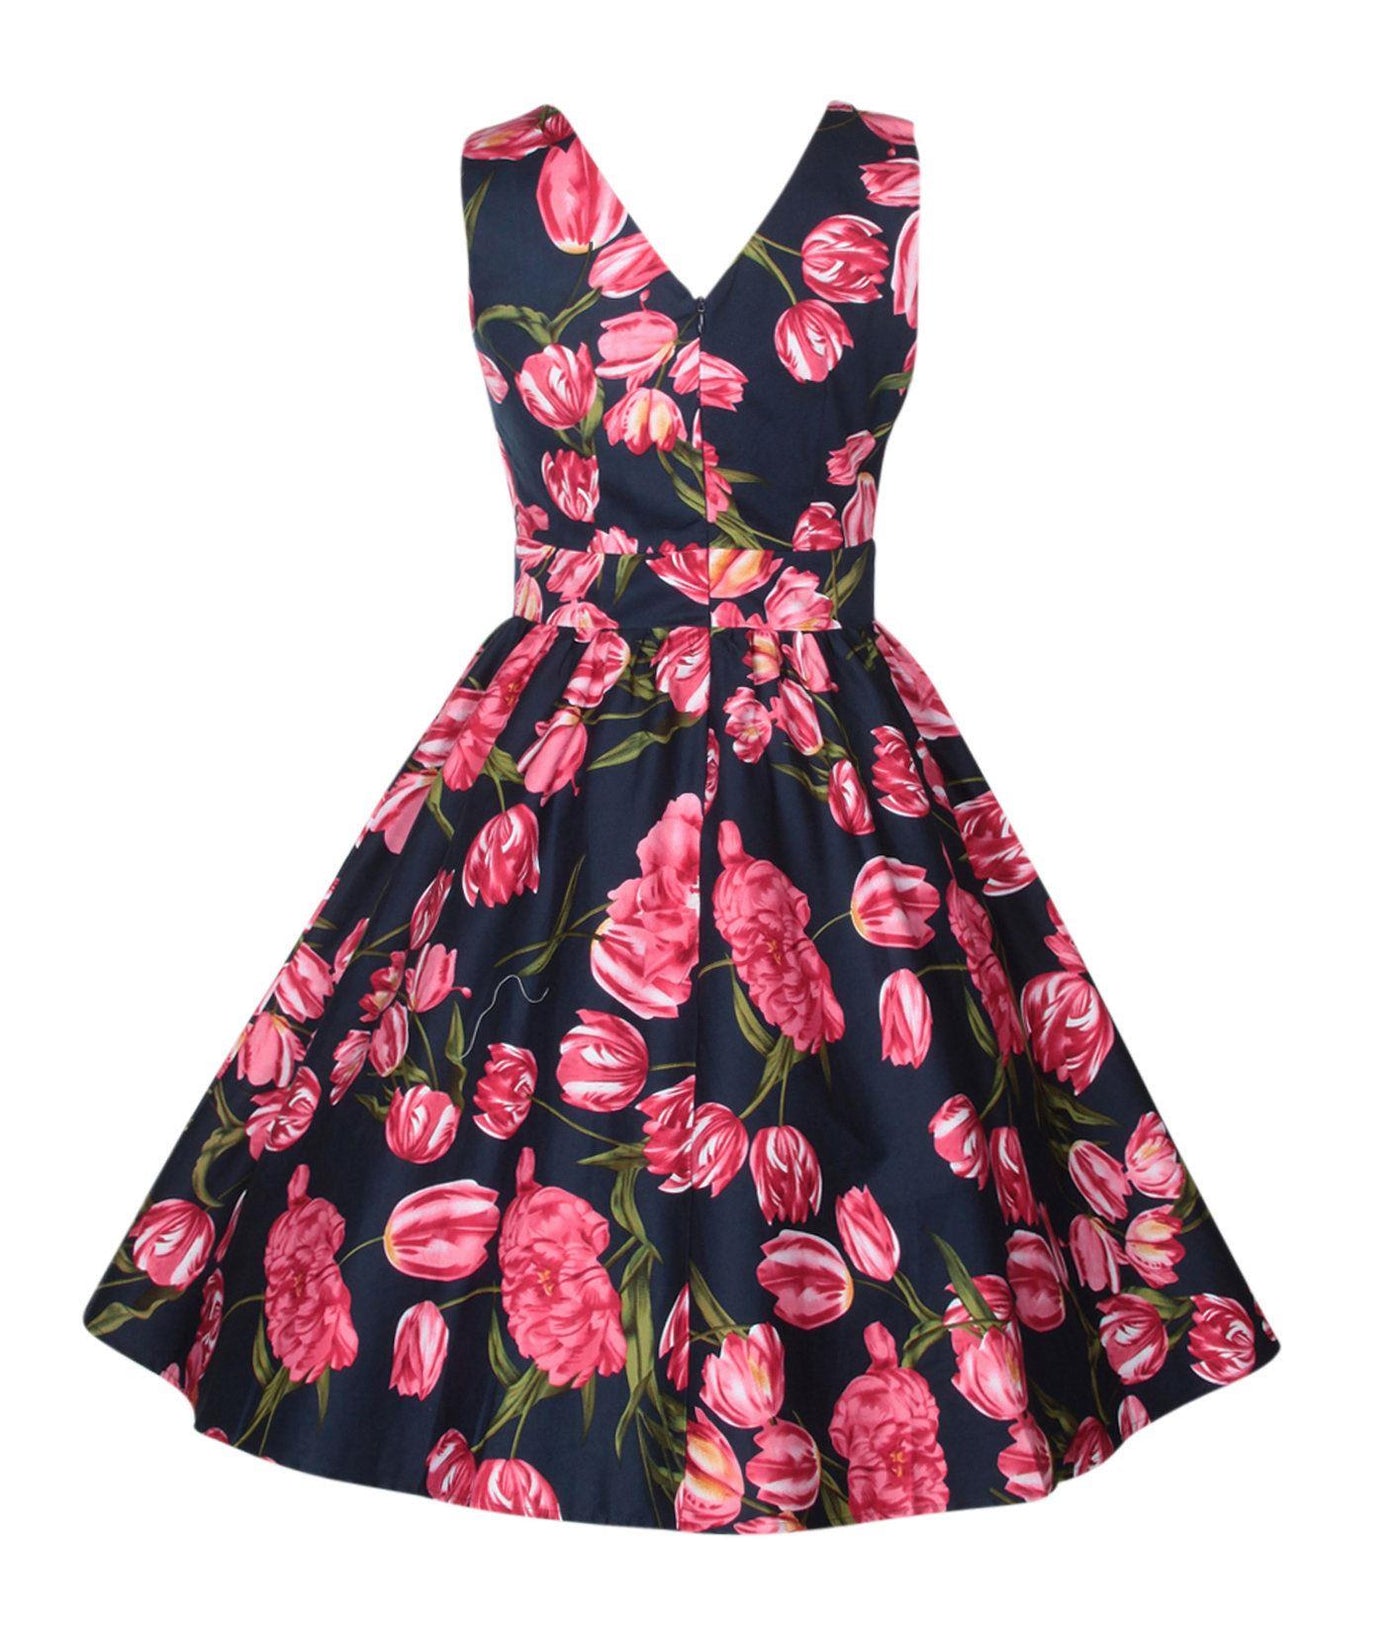 May V neck floral dress, in navy blue, with pink tulips, back view